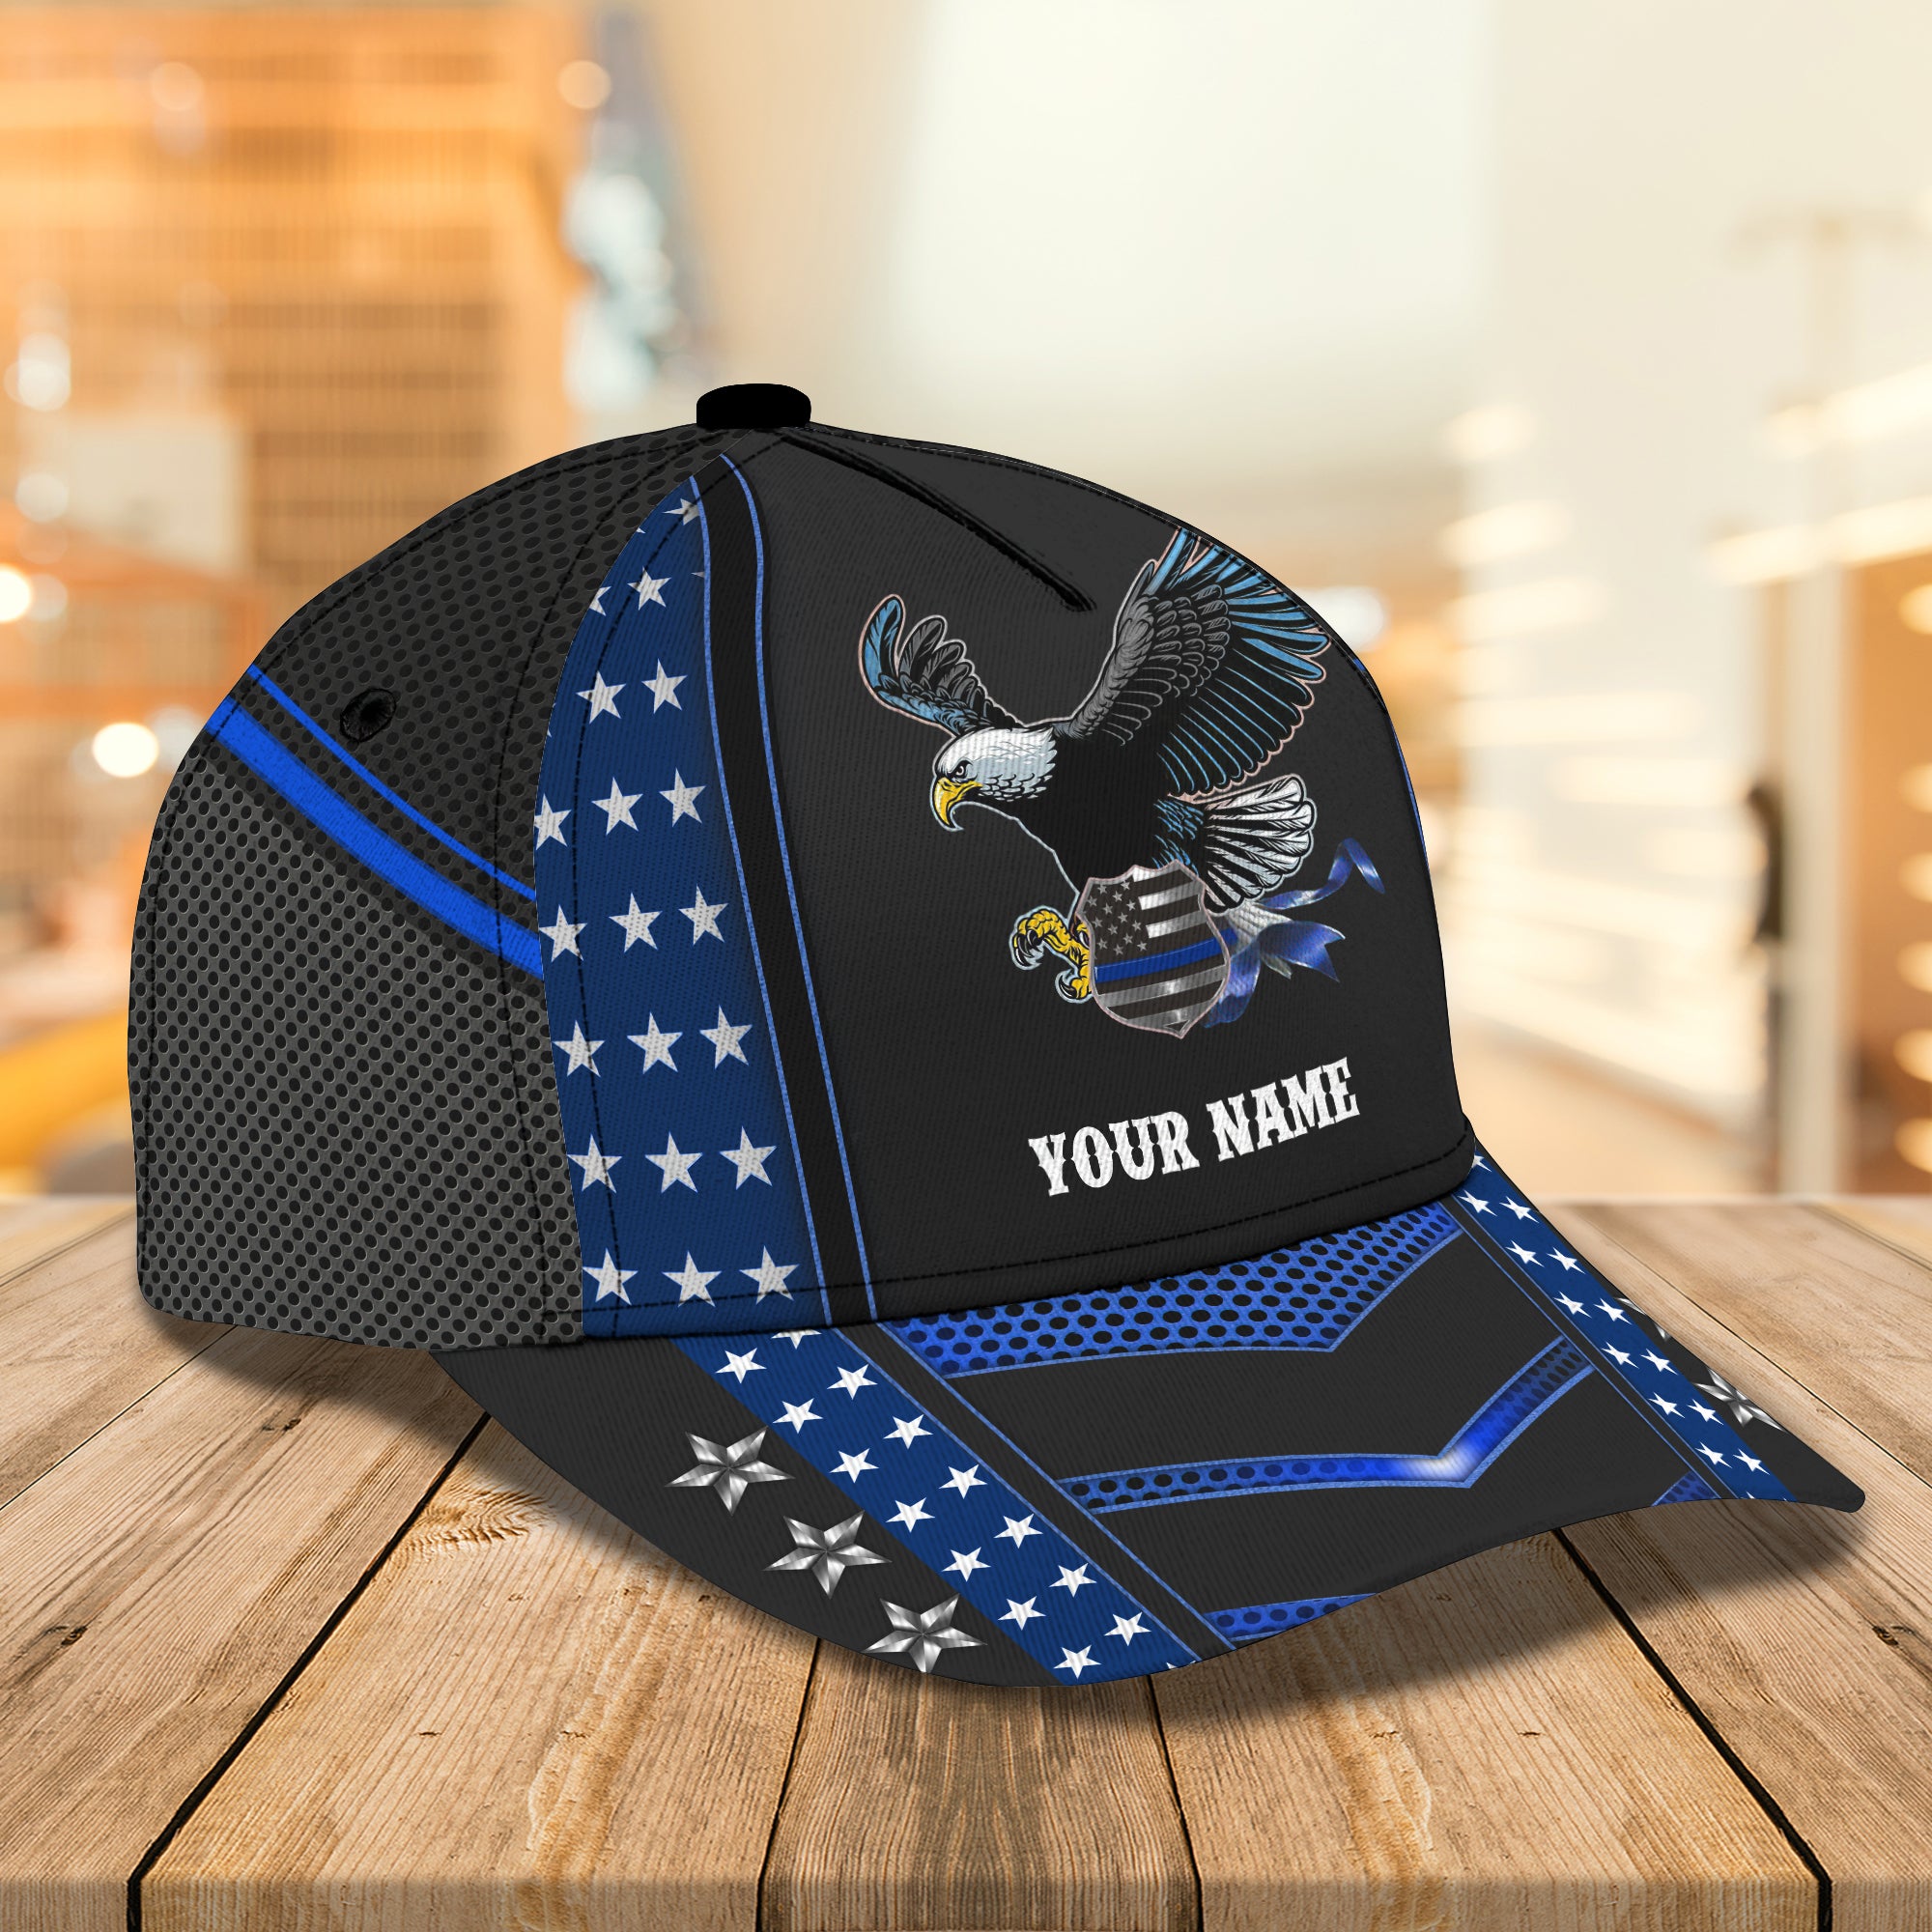 Back The Blue Eagle - Personalized Name Cap - Vtm99